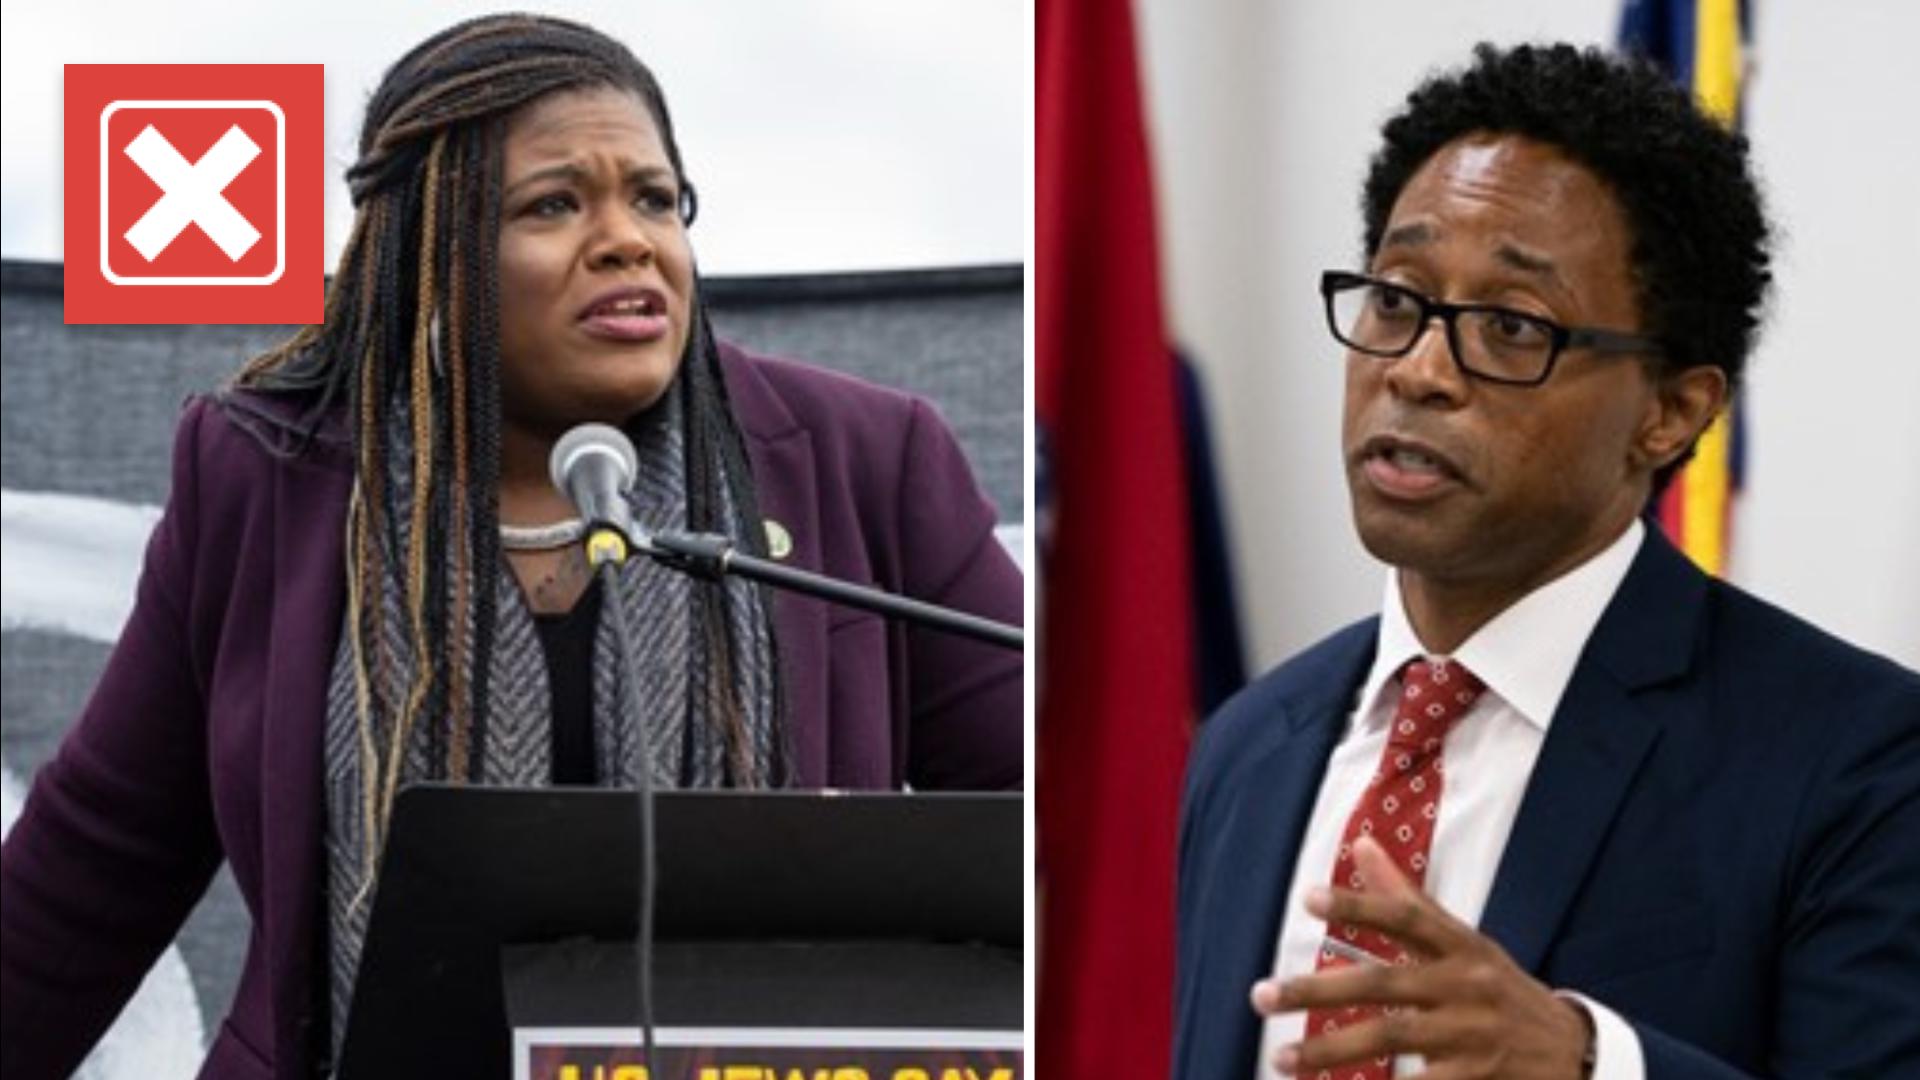 Congresswoman Cori Bush claimed her challenger, Wesley Bell, won't protect reproductive rights. Bell's previous actions contradict Bush's claims.